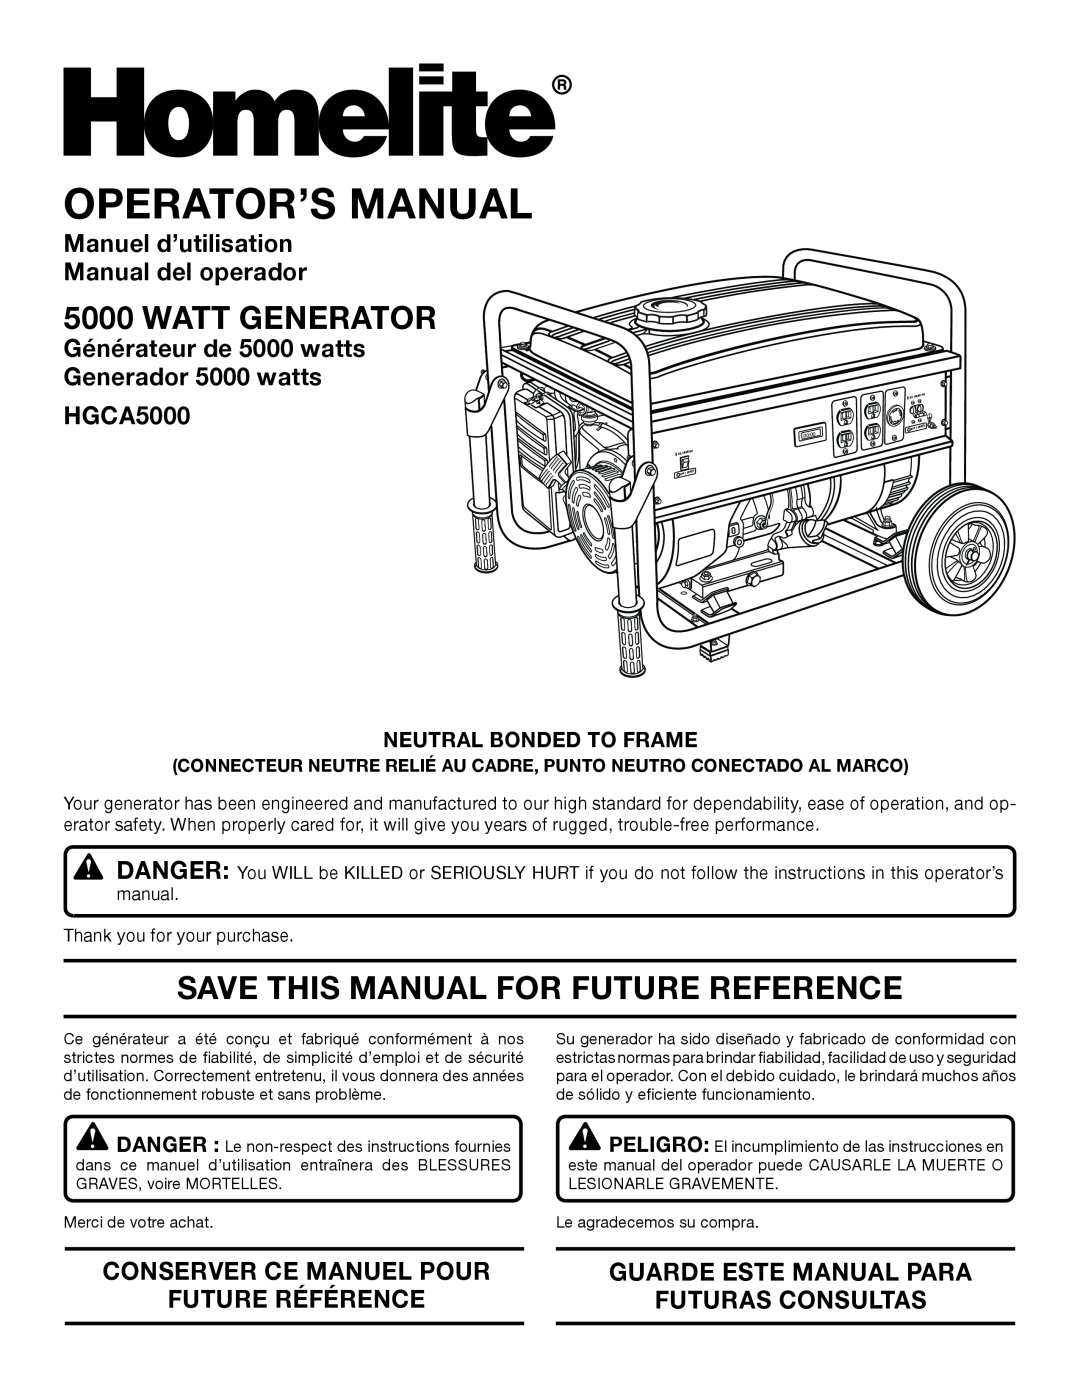 Homelite HGCA5000 manuel dutilisation Watt Generator, Save This Manual For Future Reference, Neutral Bonded To Frame 